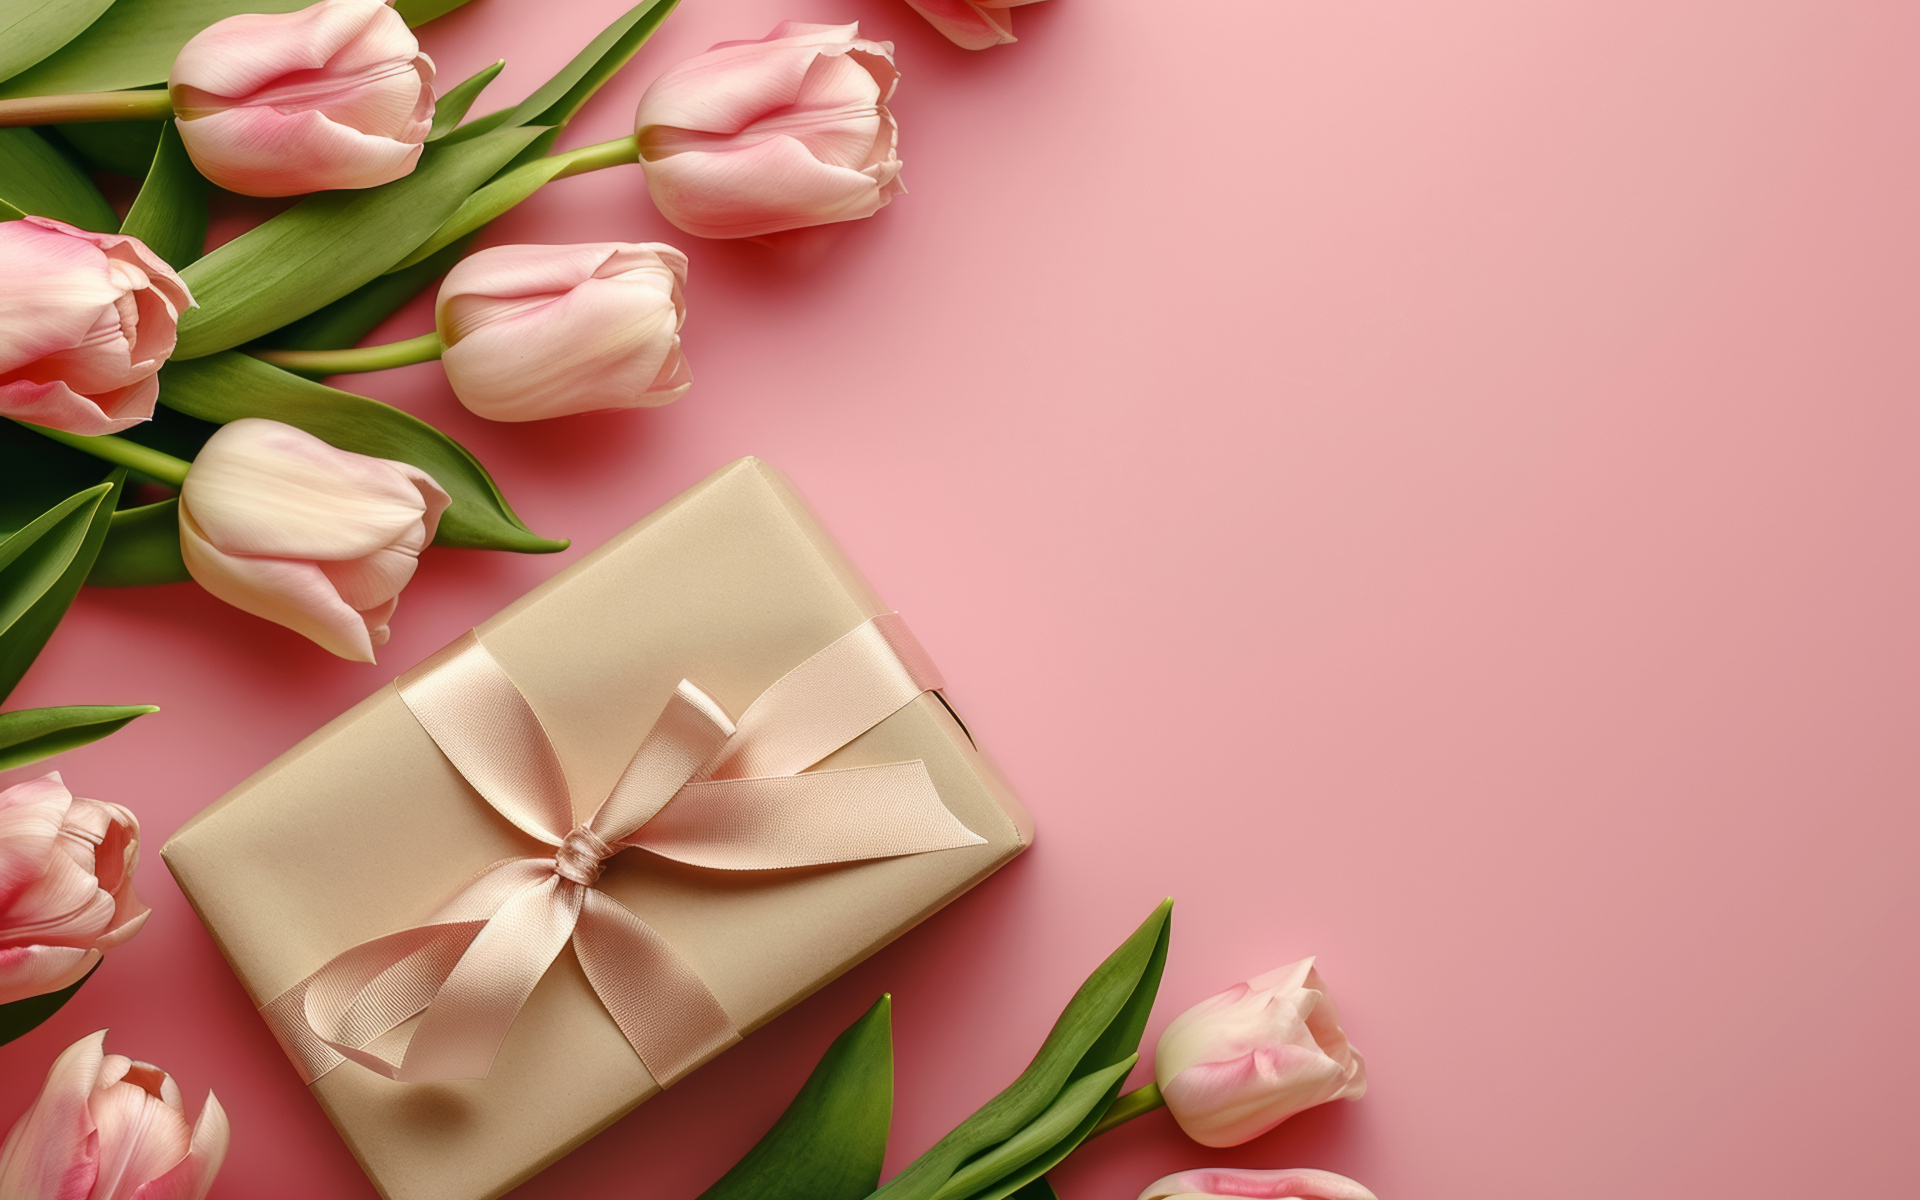 Gift with tulips for a loved one on a pink background